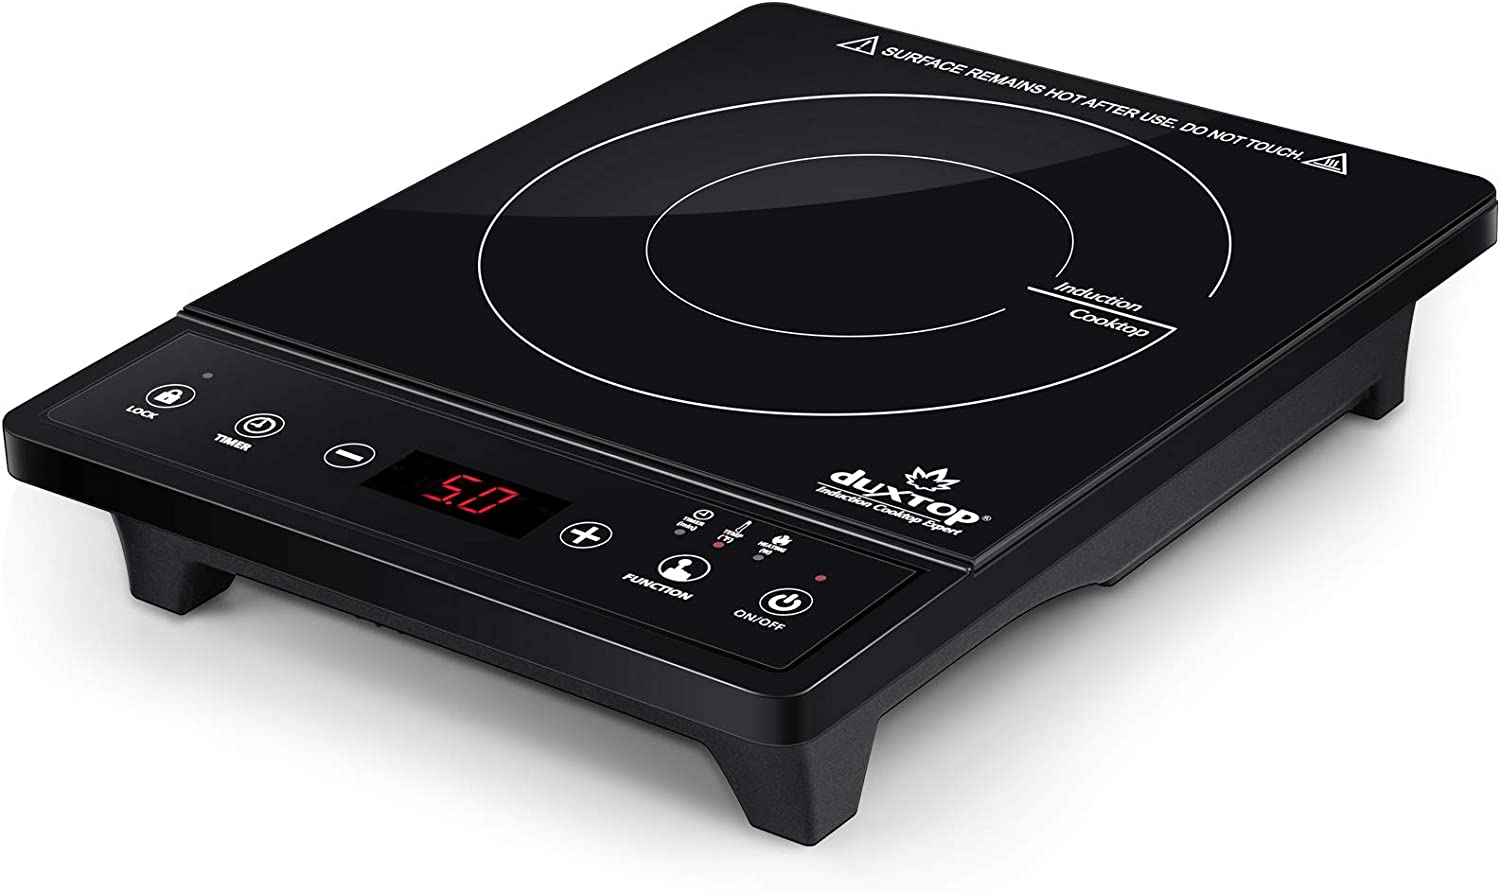 https://discounttoday.net/wp-content/uploads/2022/10/Duxtop-Portable-Induction-Cooktop-Countertop-Burner-Induction-Burner-with-Timer-and-Sensor-Touch-1800W-8500ST-E210C2.jpg